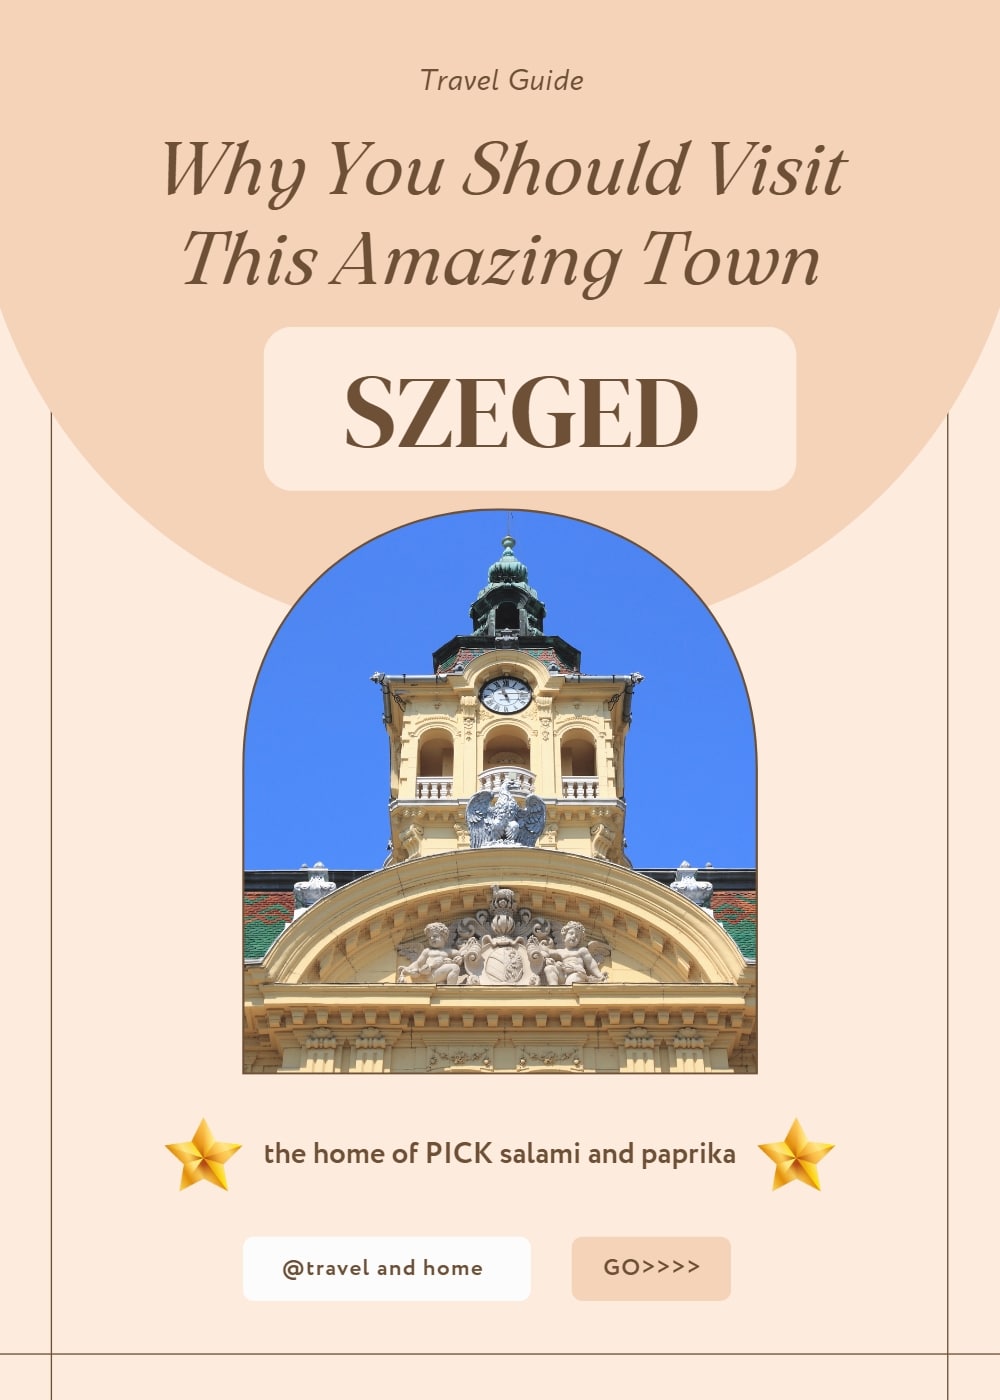 Szeged travel guide Hungarys rd largest city where is paprika made where is pick salami made travel and home travelandhome reis en huis min min